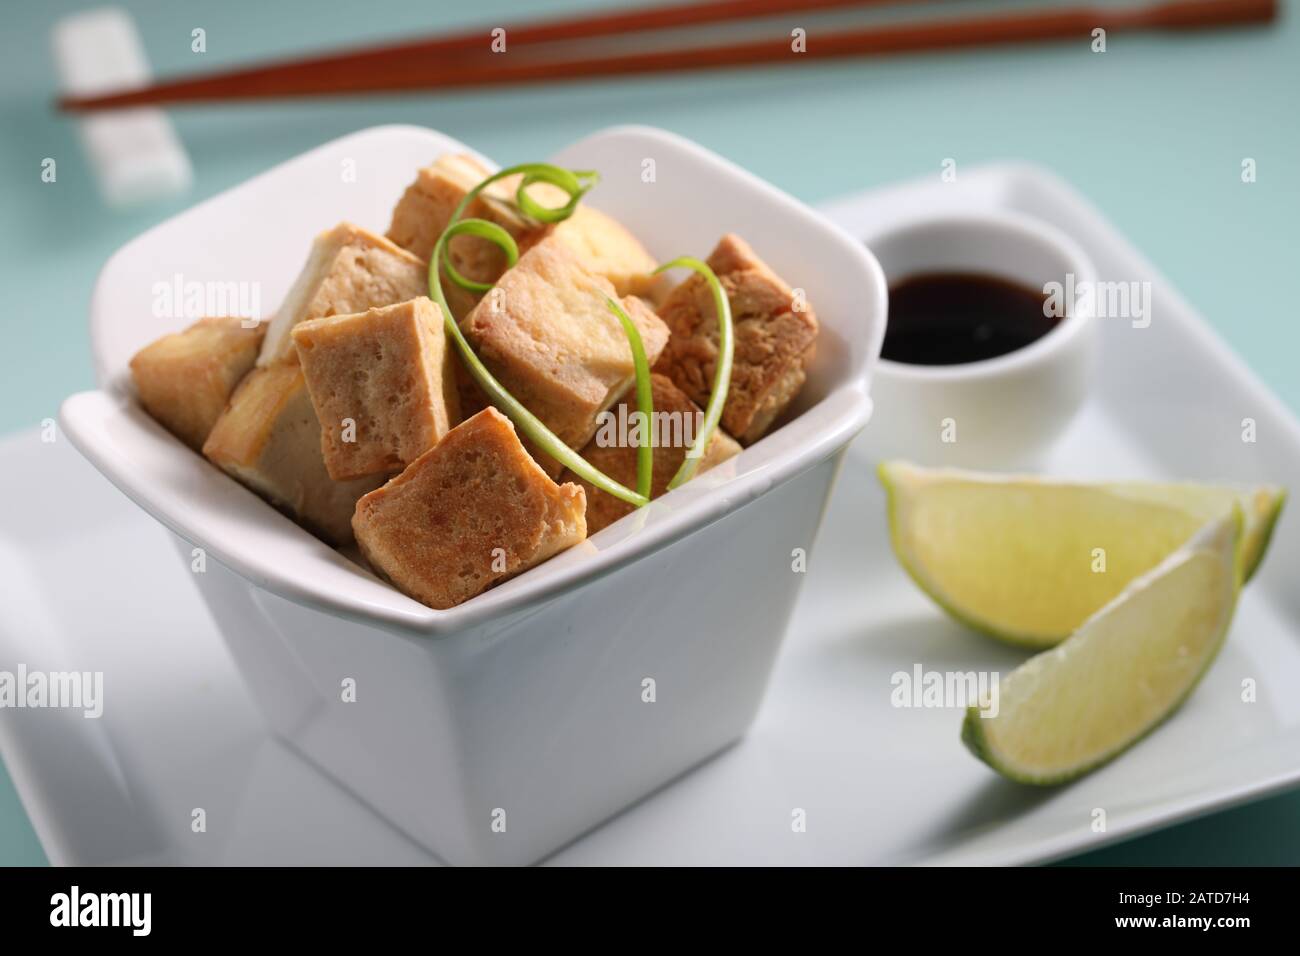 Fried tofu served with soy sauce, slices of lime, and green onion on a white plate closeup Stock Photo